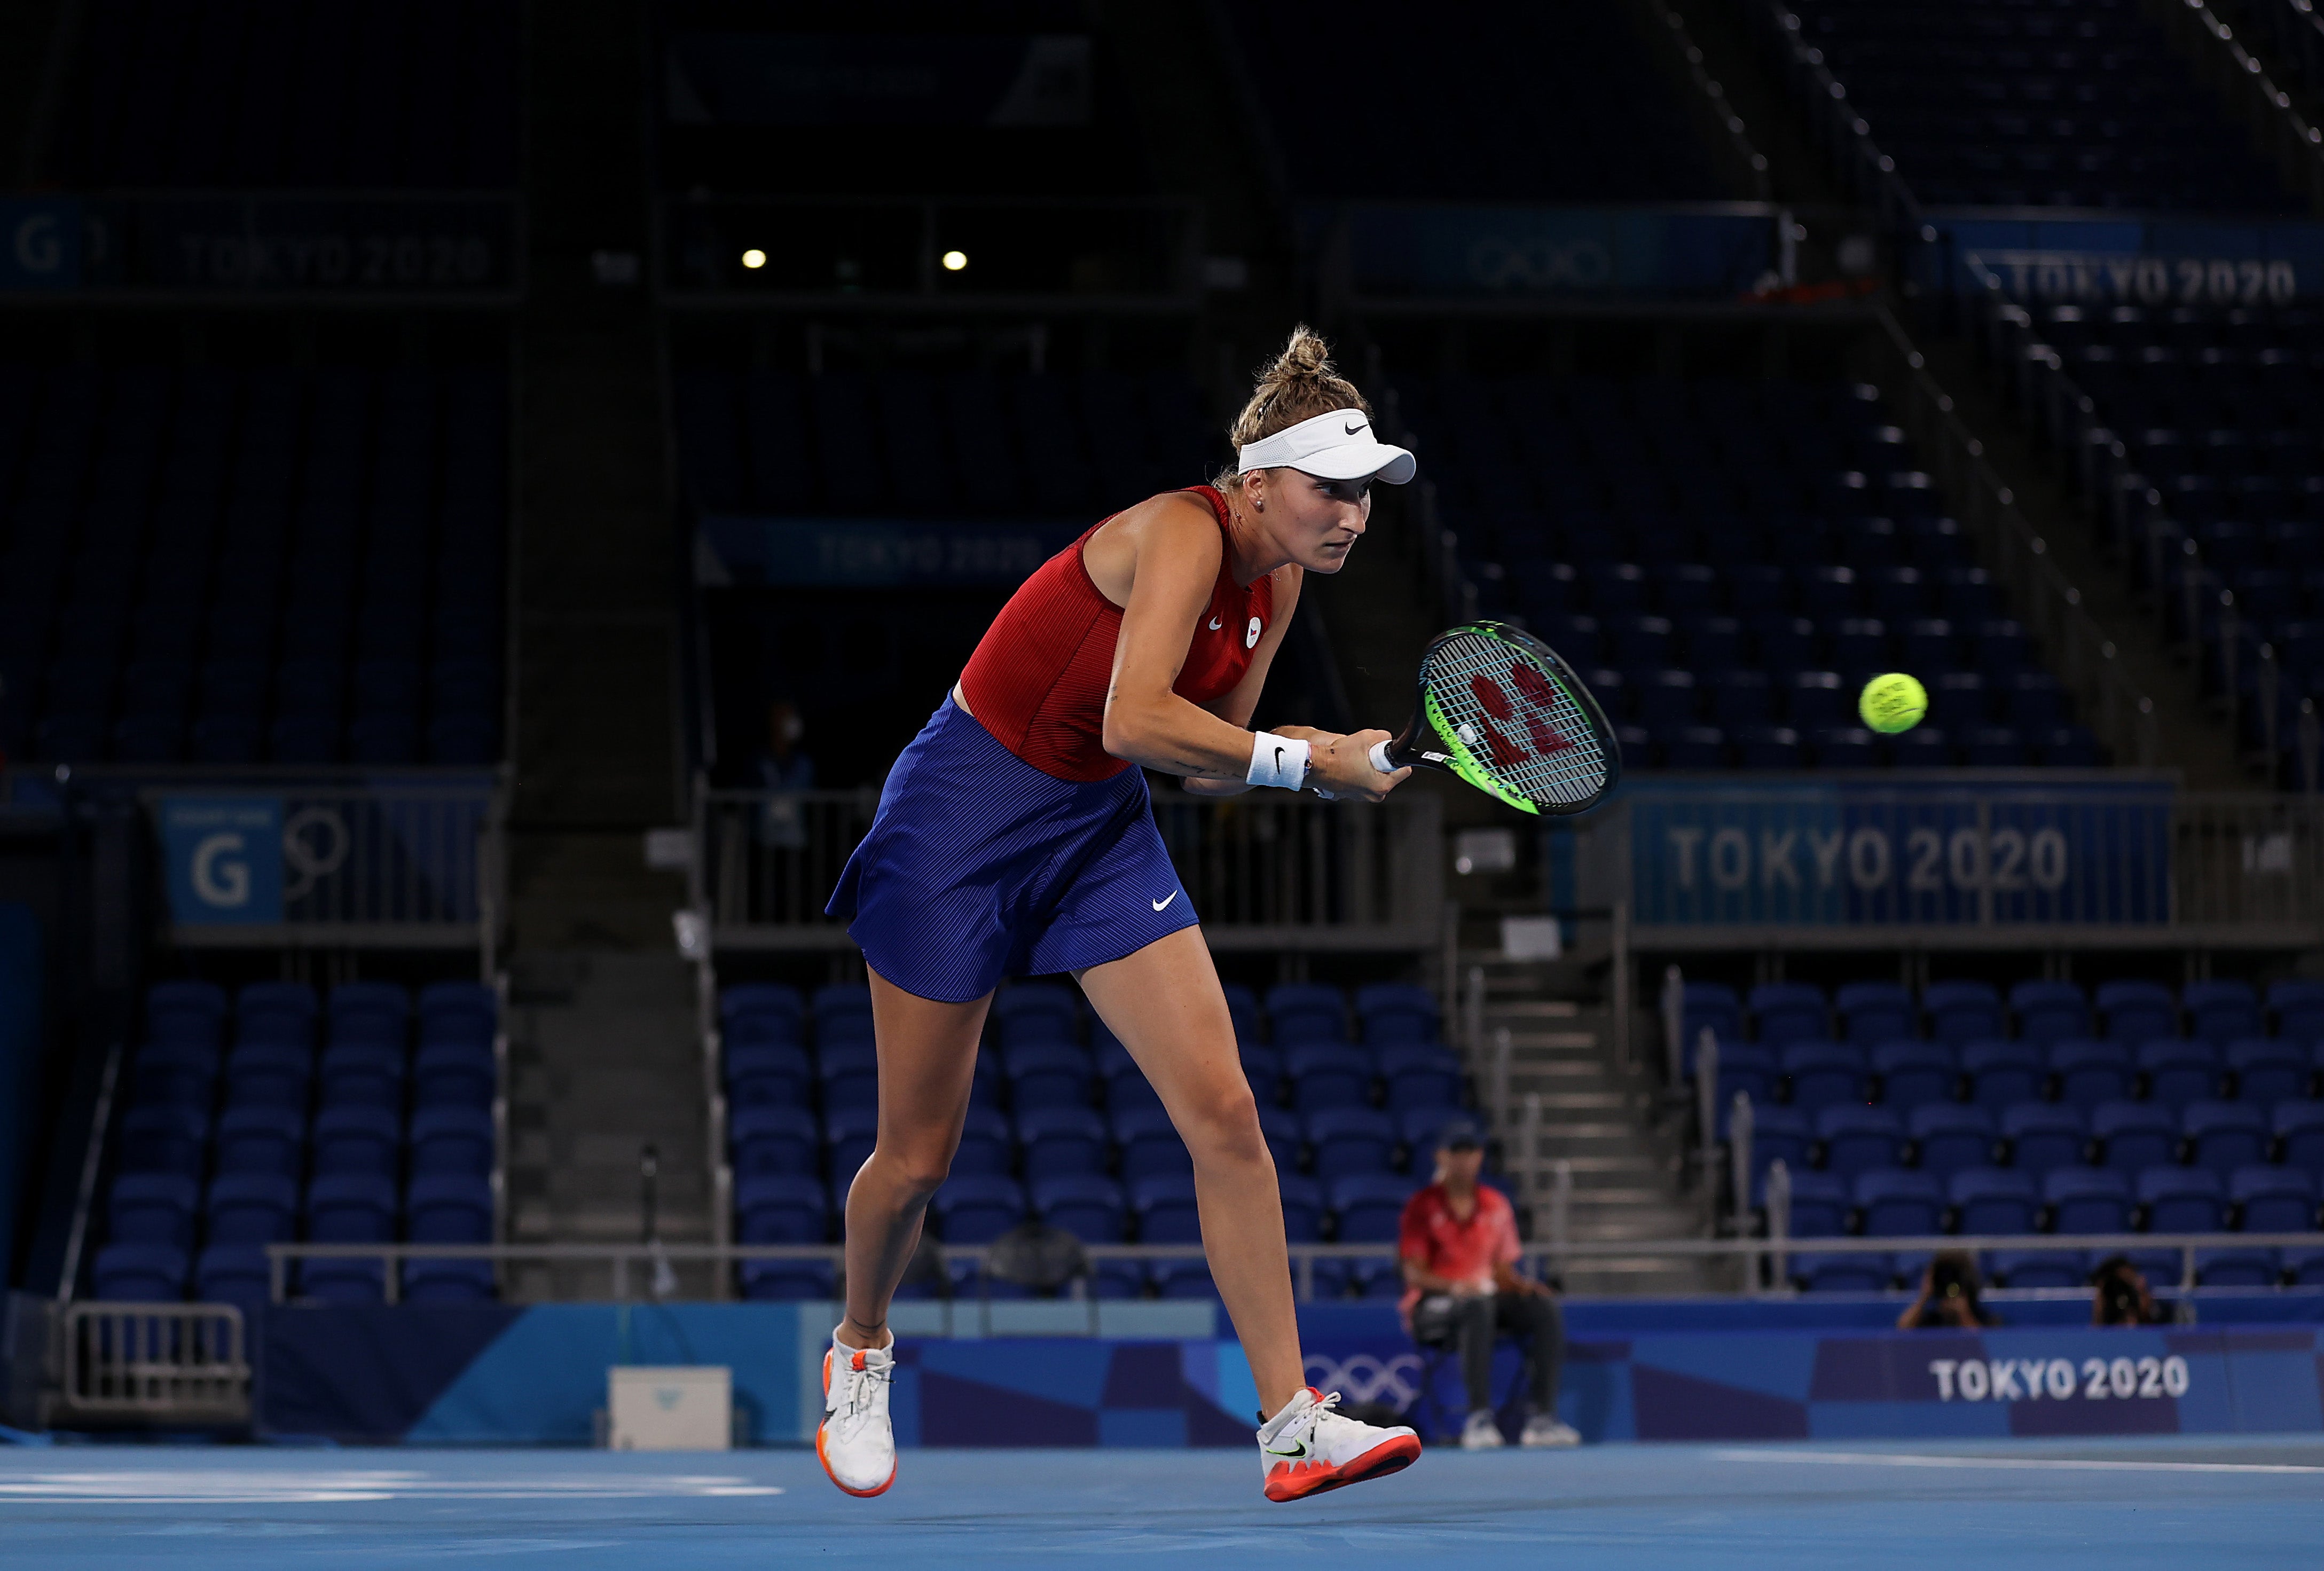 Marketa Vondrousova of Team Czech Republic plays a backhand during her Women's Singles Third Round match against Naomi Osaka of Team Japan on day four of the Tokyo 2020 Olympic Games at Ariake Tennis Park on 27 July 2021 in Tokyo, Japan